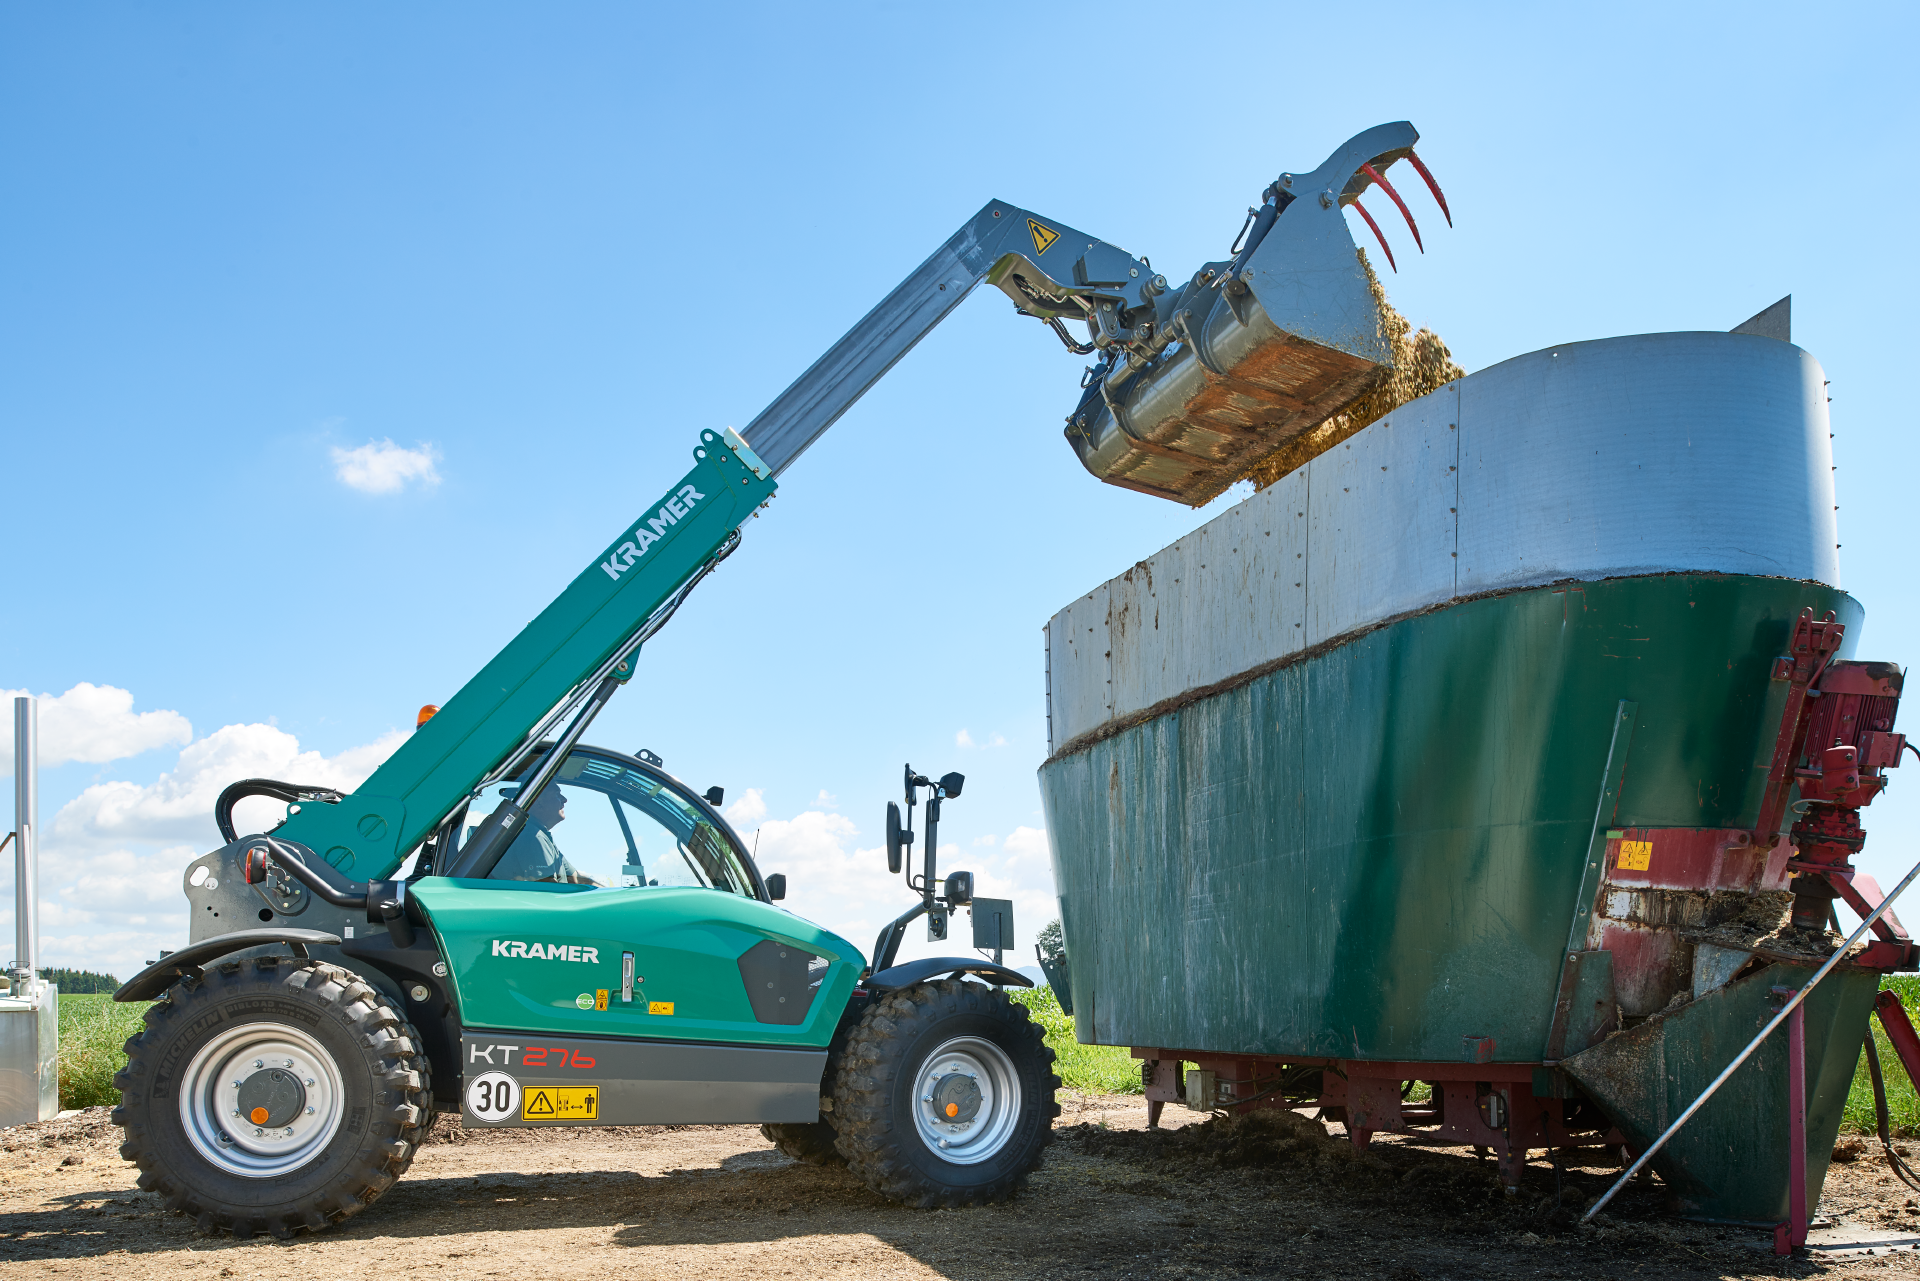 The Kramer telehandler KT276 while loading a container.